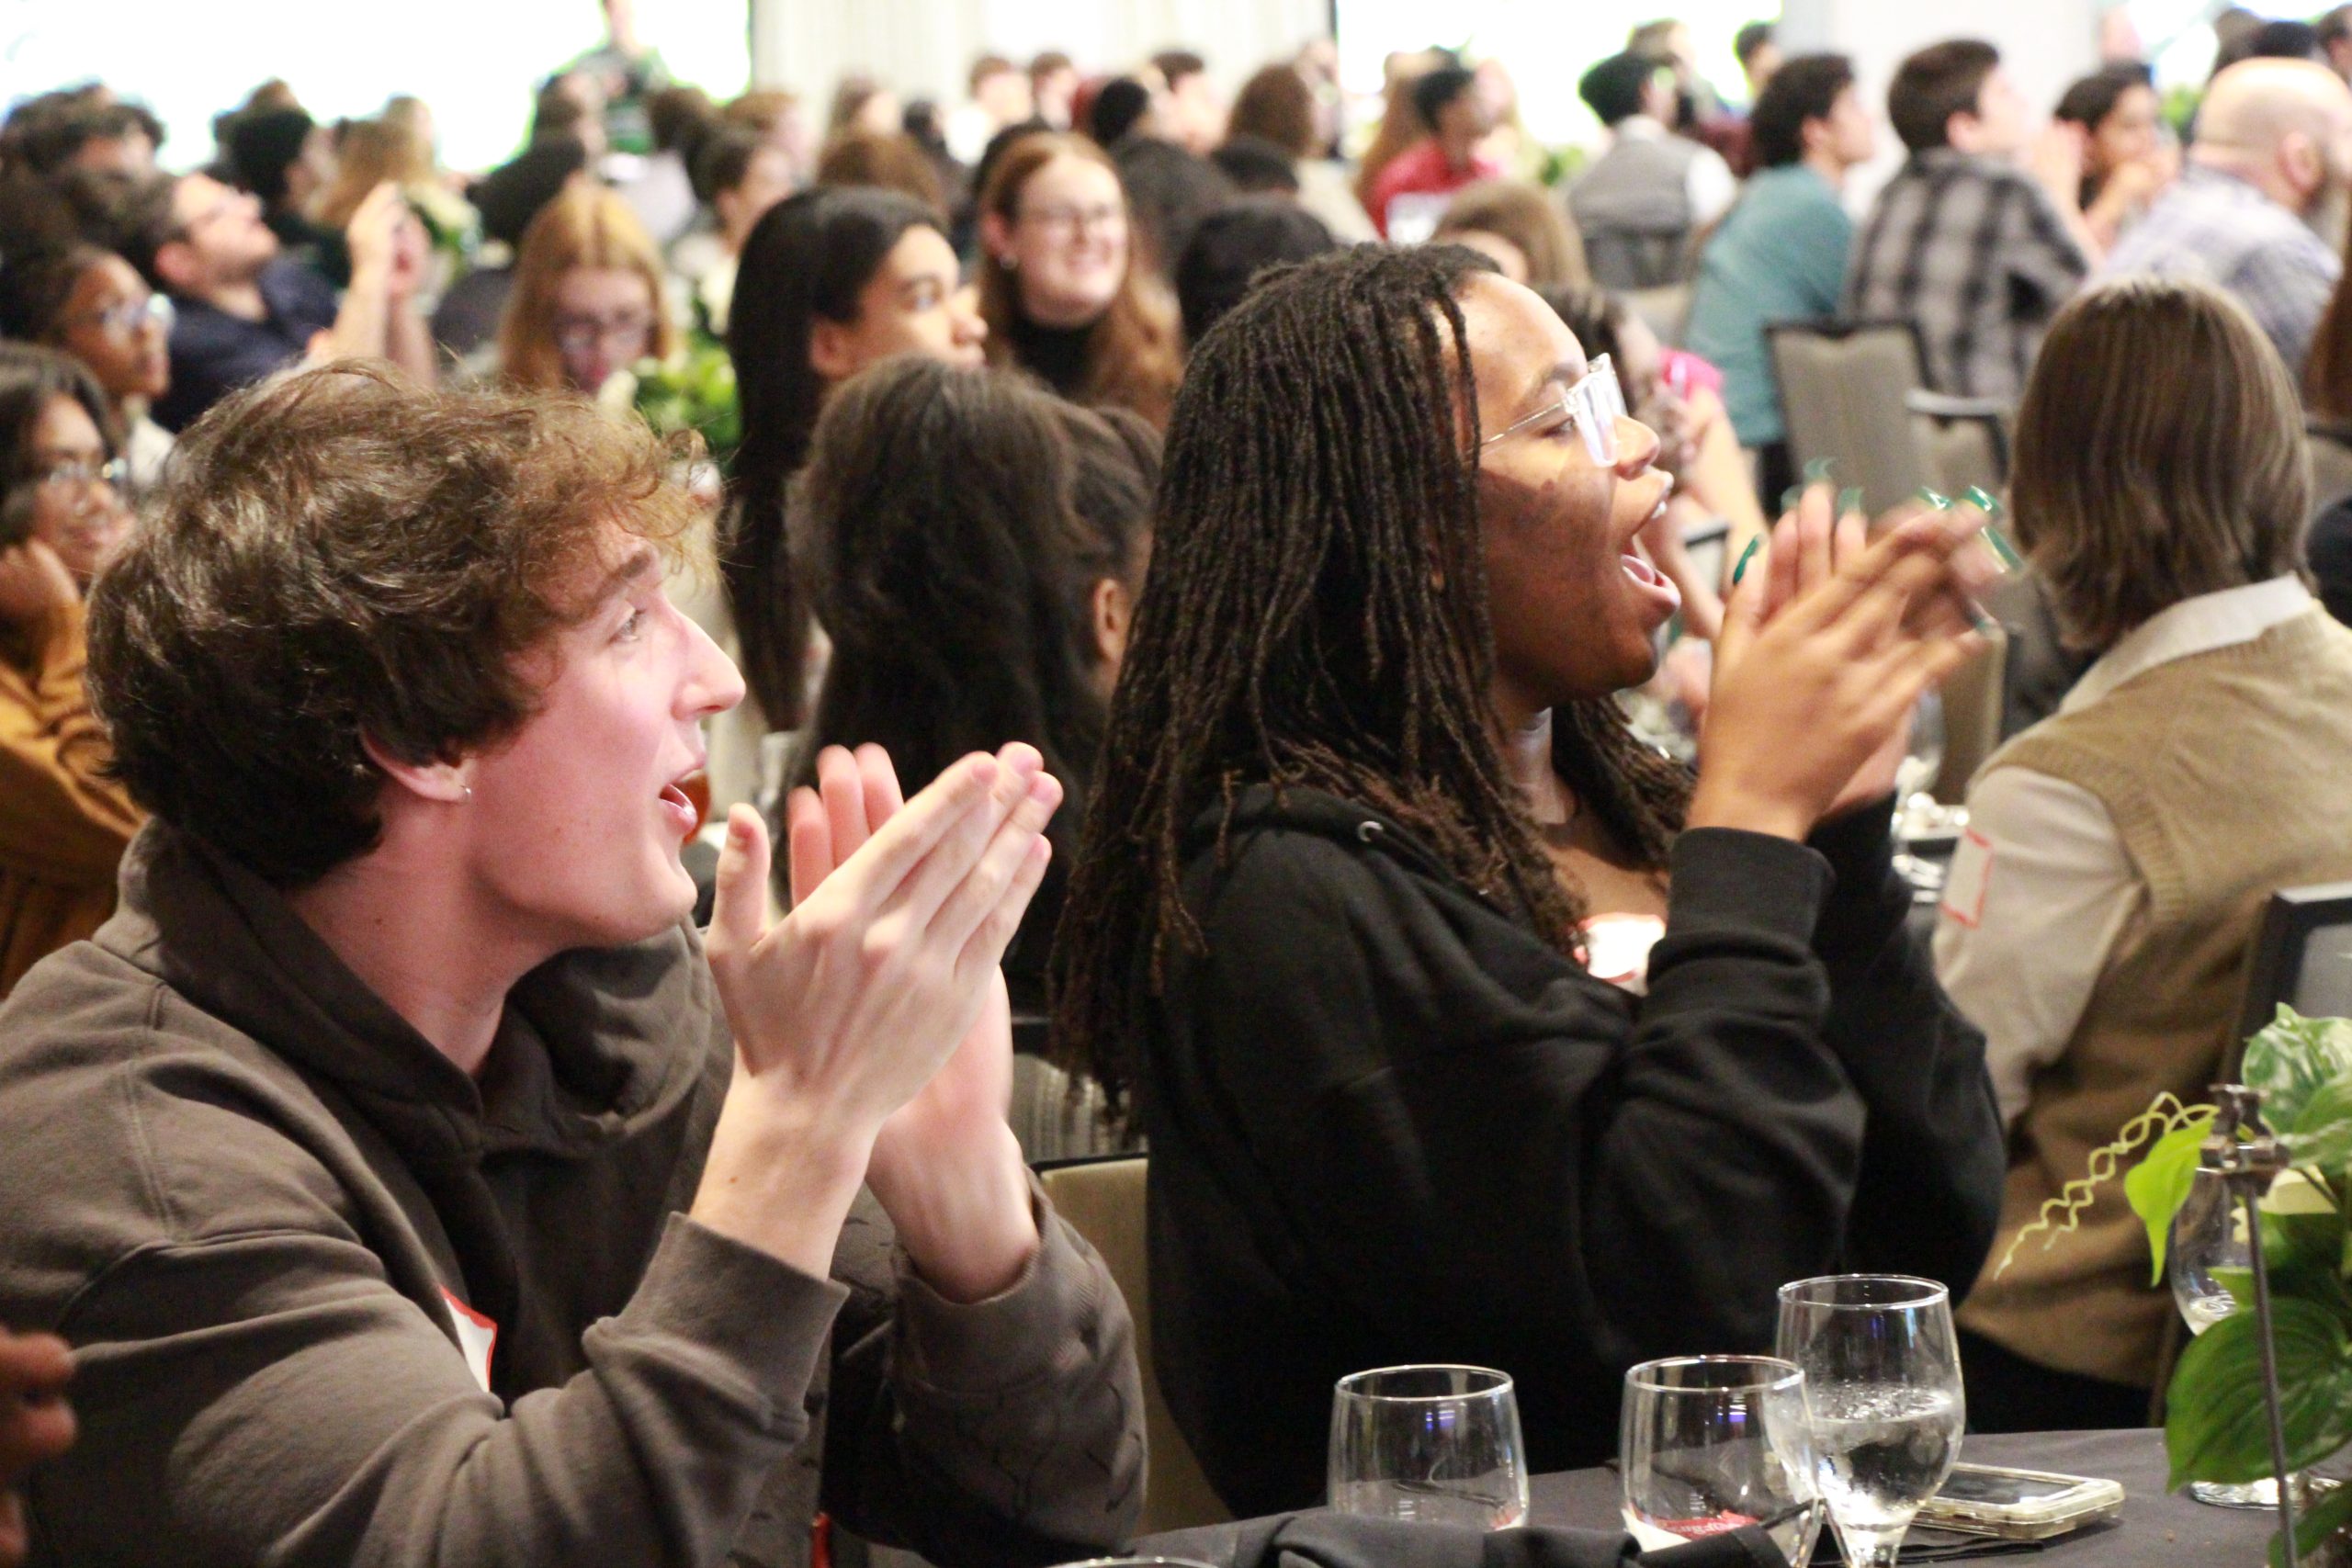 Students clap while sitting down during the GSPA Awards.